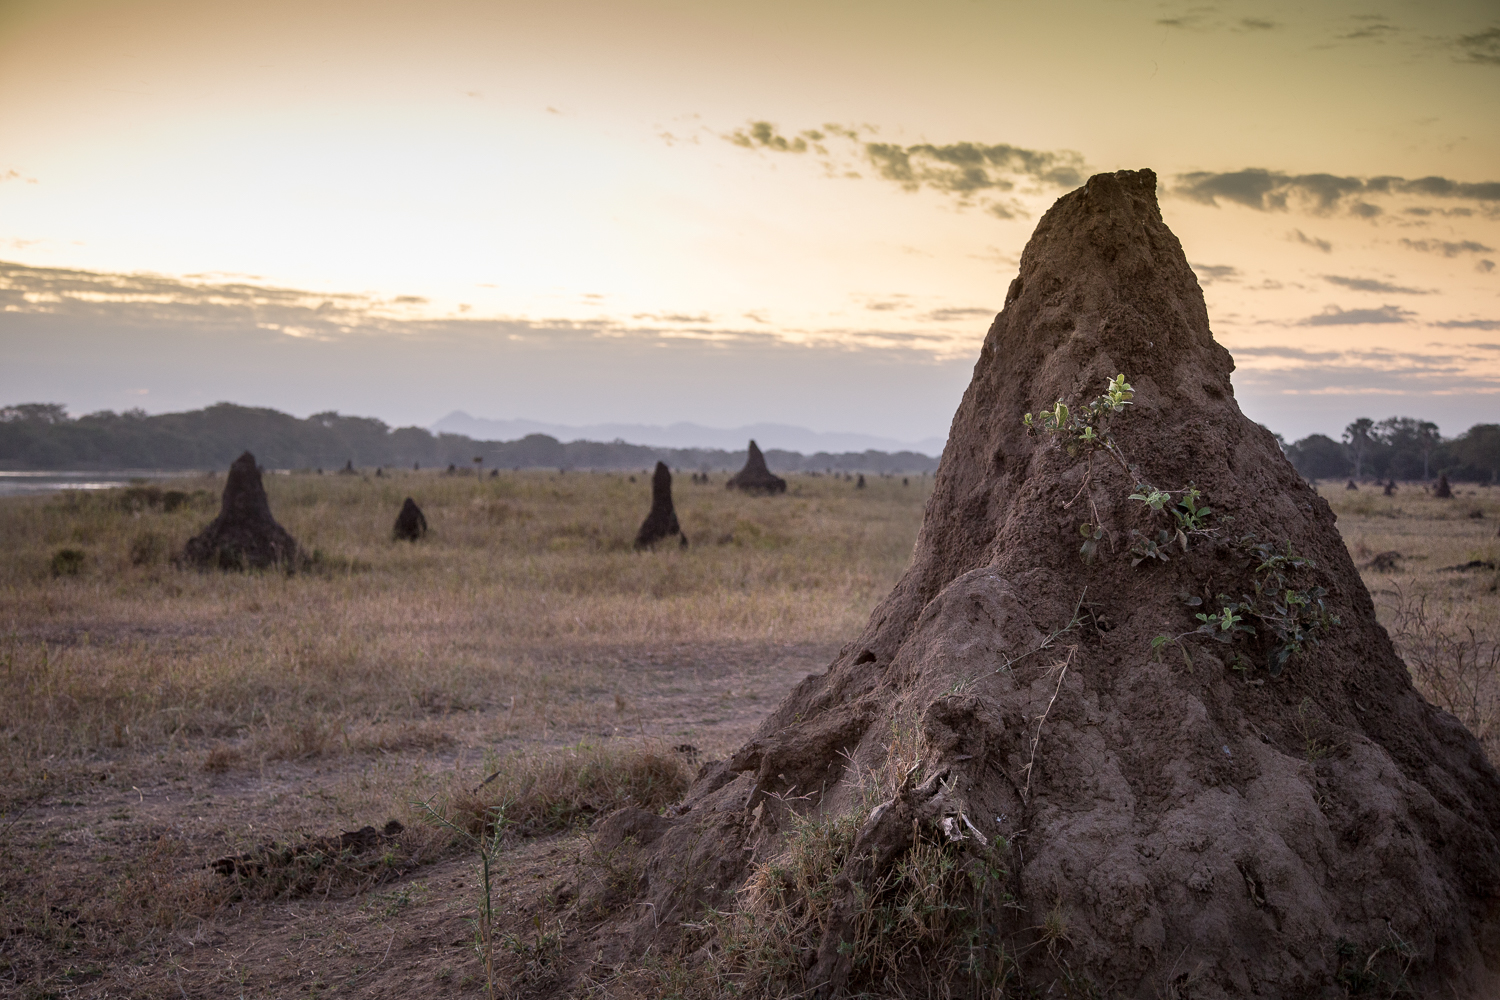  Termite mounds at sunset. 